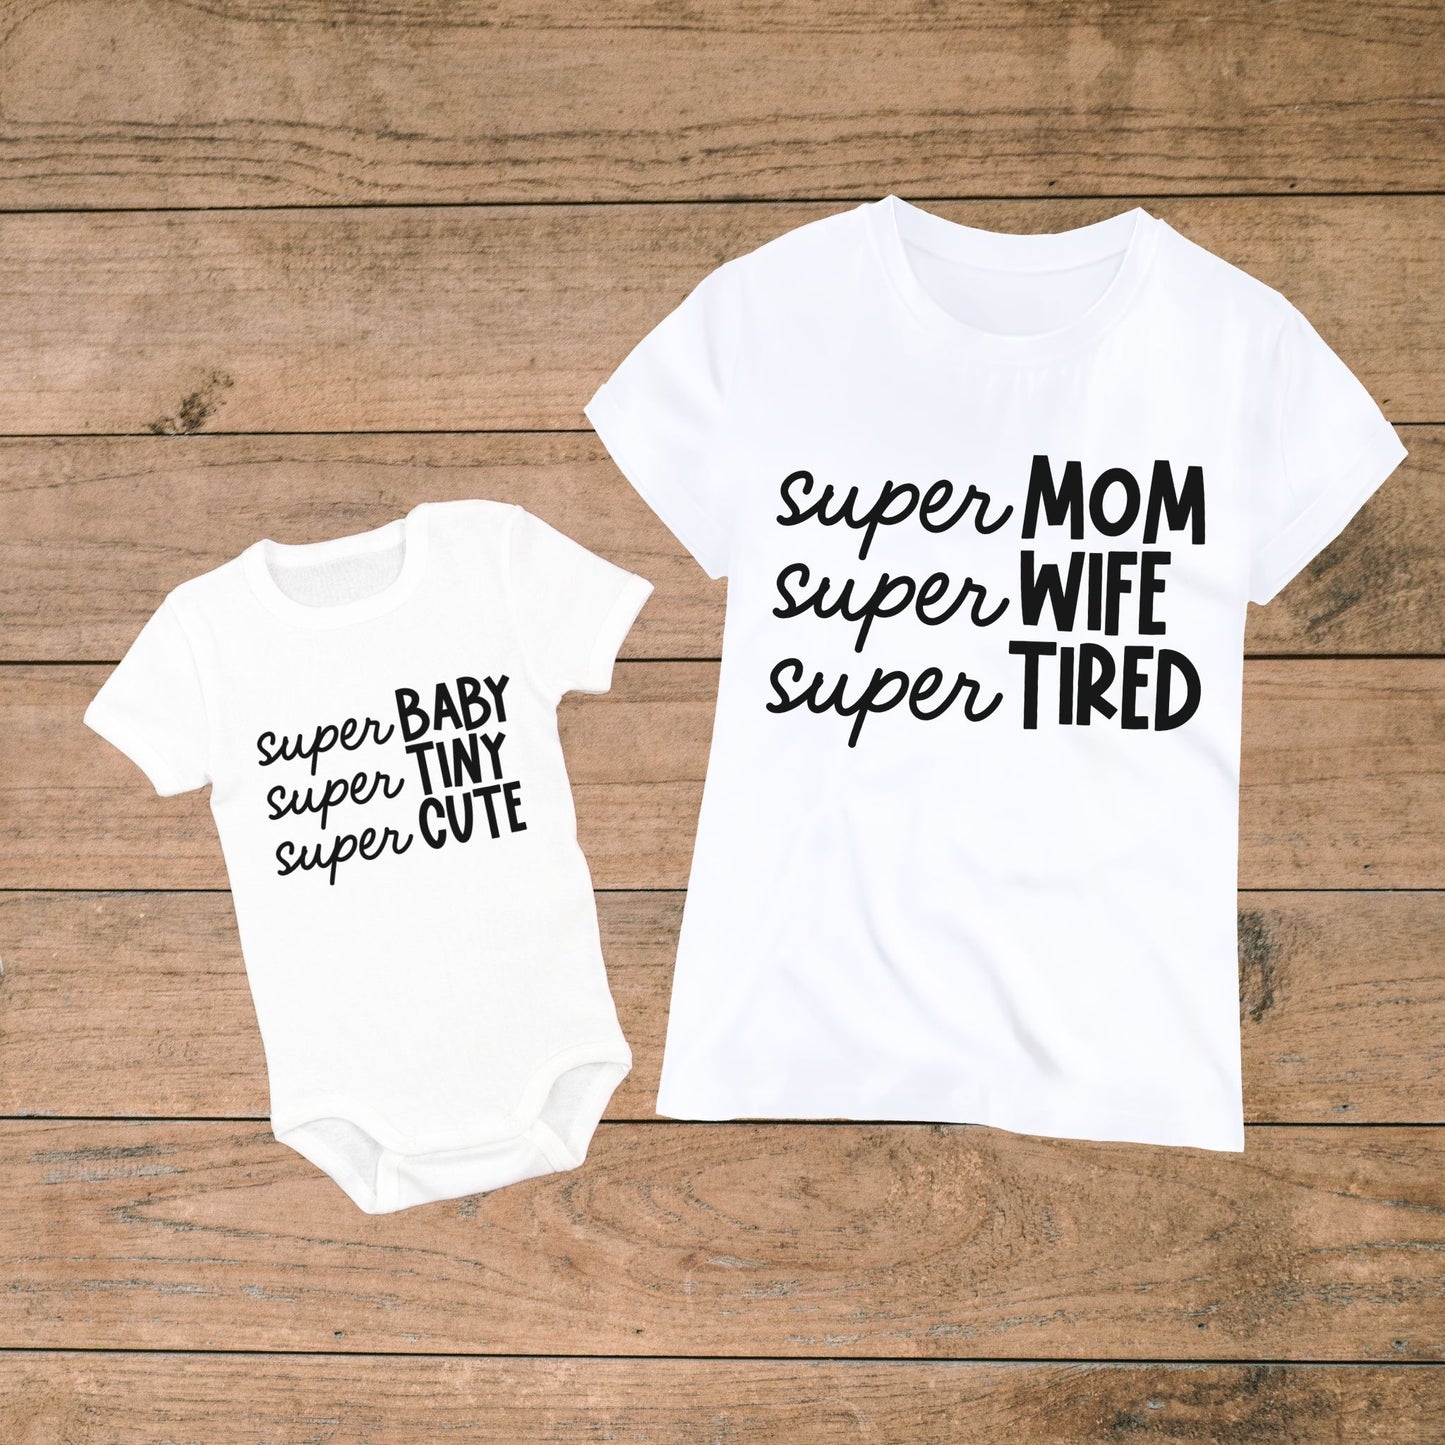 Super Mom, Super Tired (But Super Cute Together!): Matching Mom & Baby Outfit